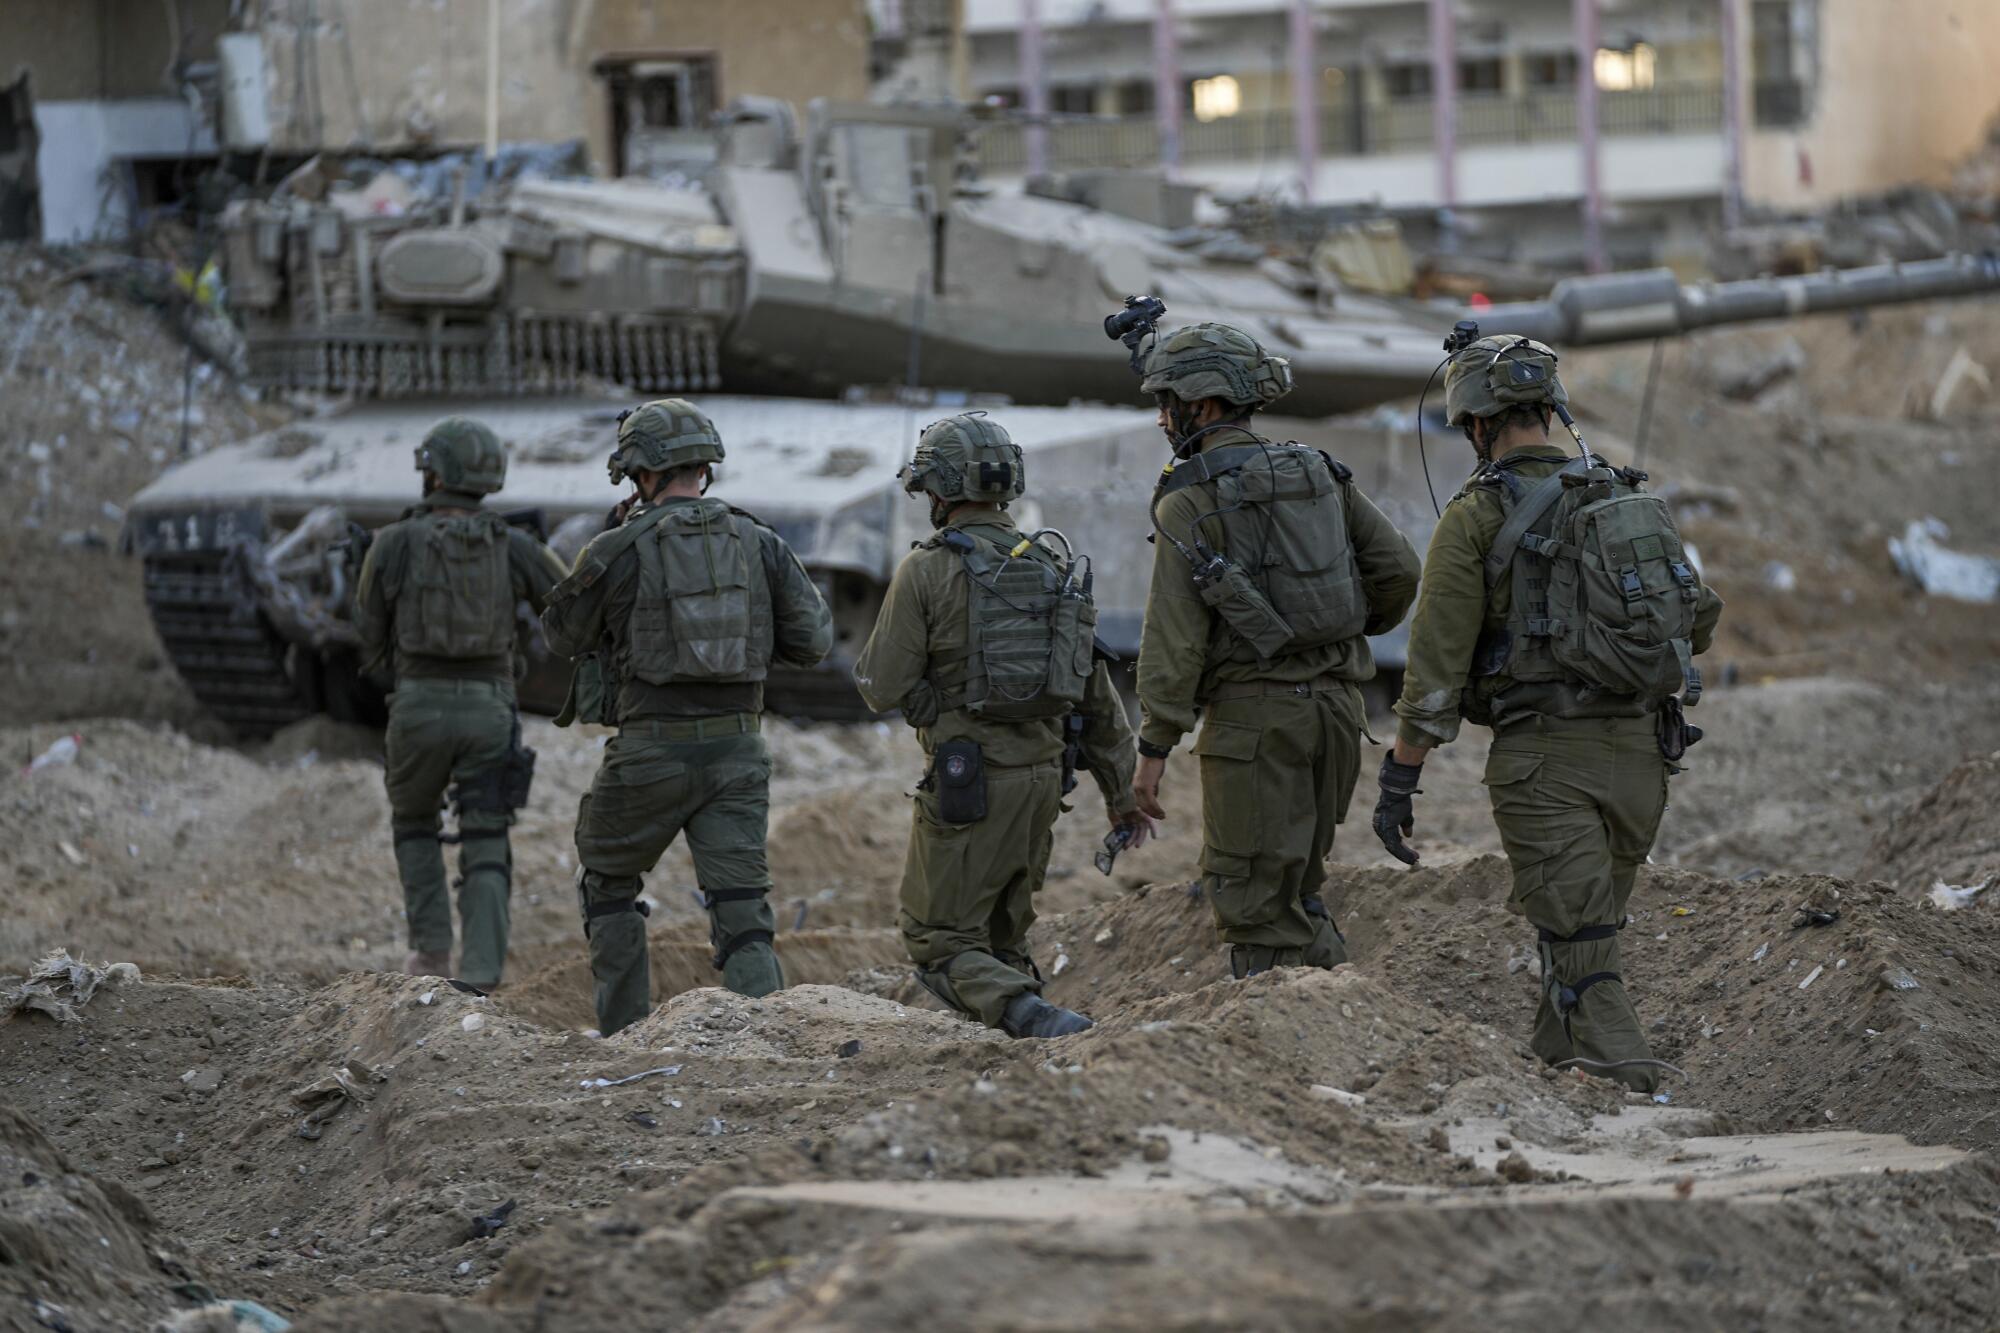 Israeli soldiers in the Gaza Strip